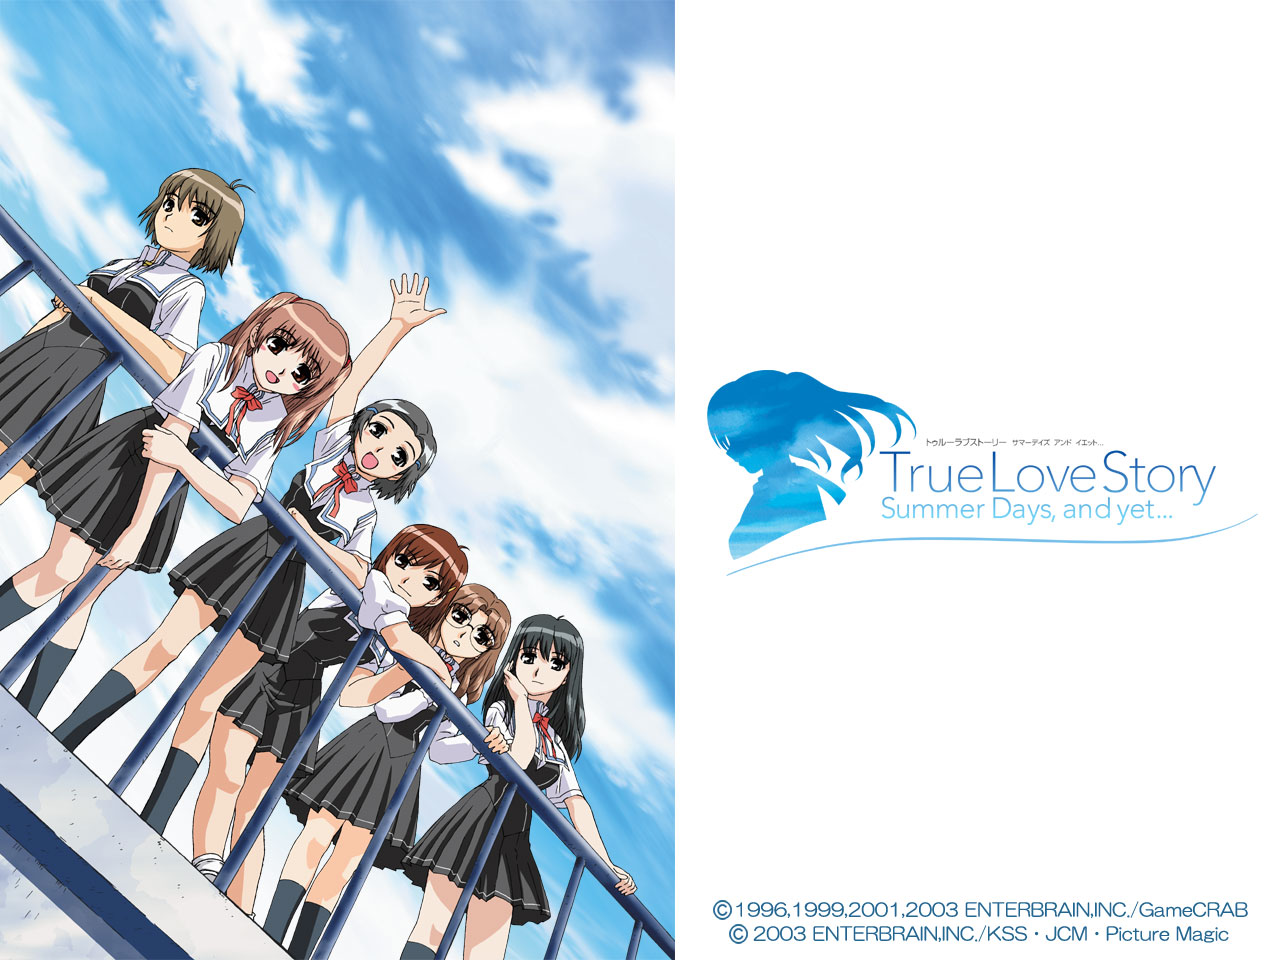 Download High quality The Love Story wallpaper / Anime / 1280x960